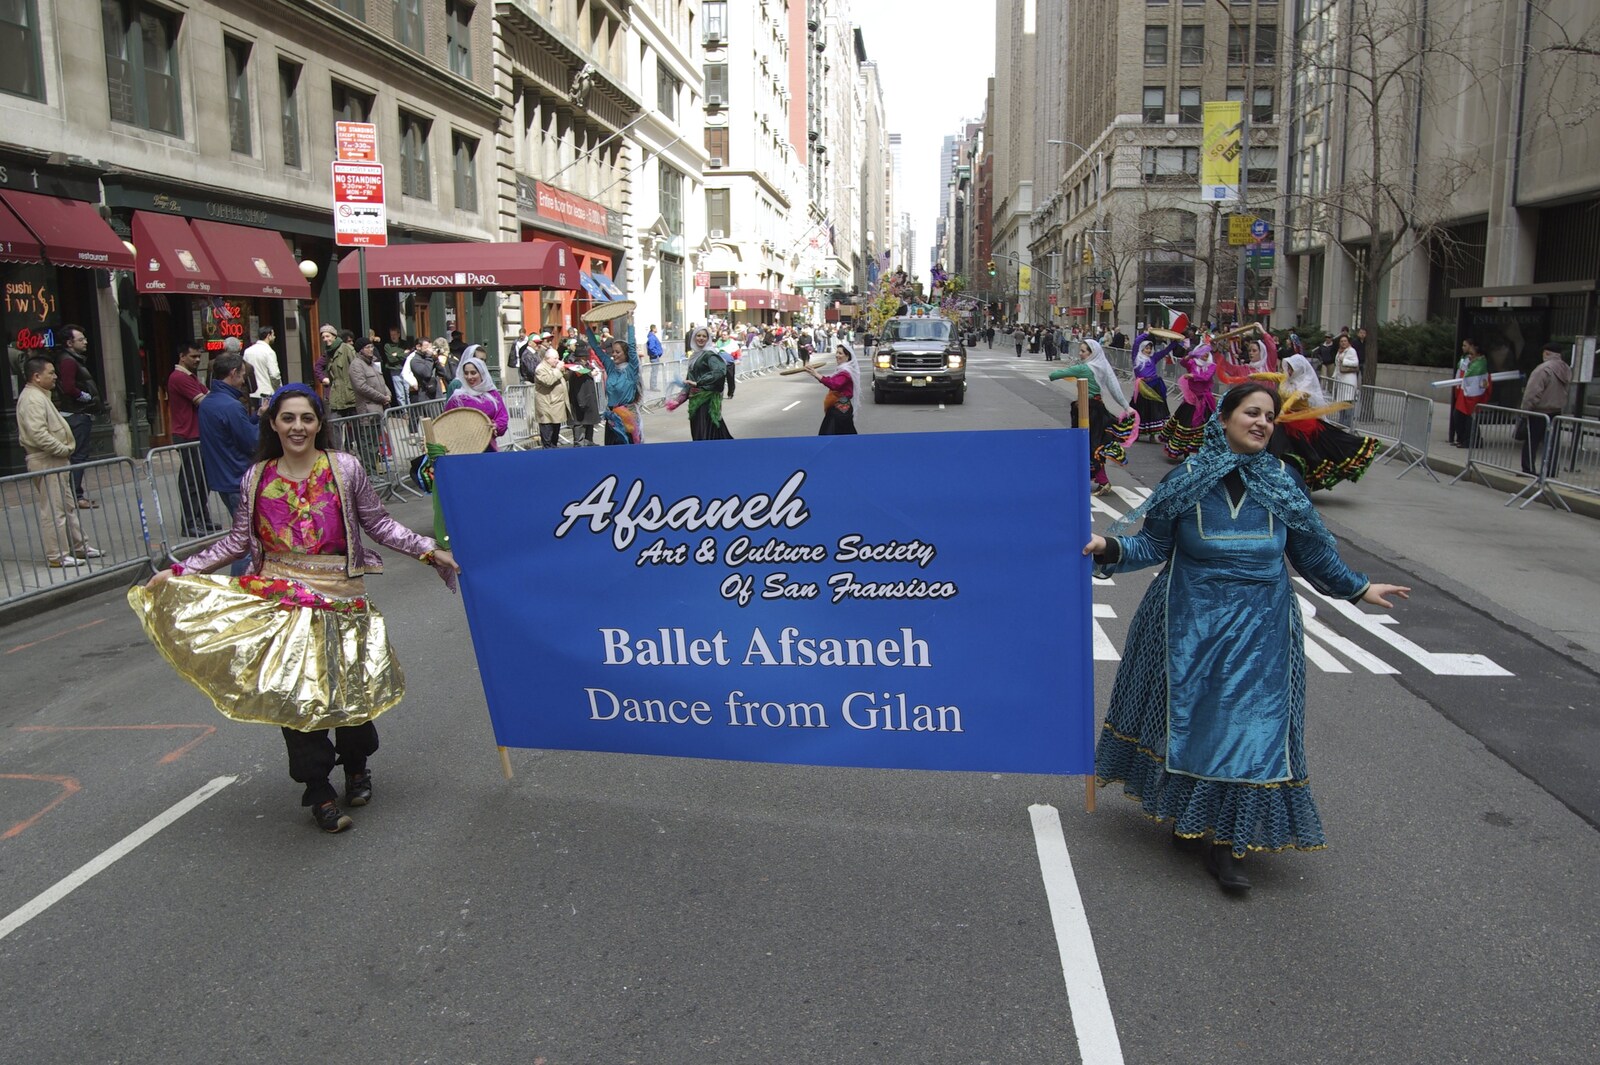 Persian Day Parade, Upper East Side and Midtown, New York, US - 25th March 2007: On Madison Avenue